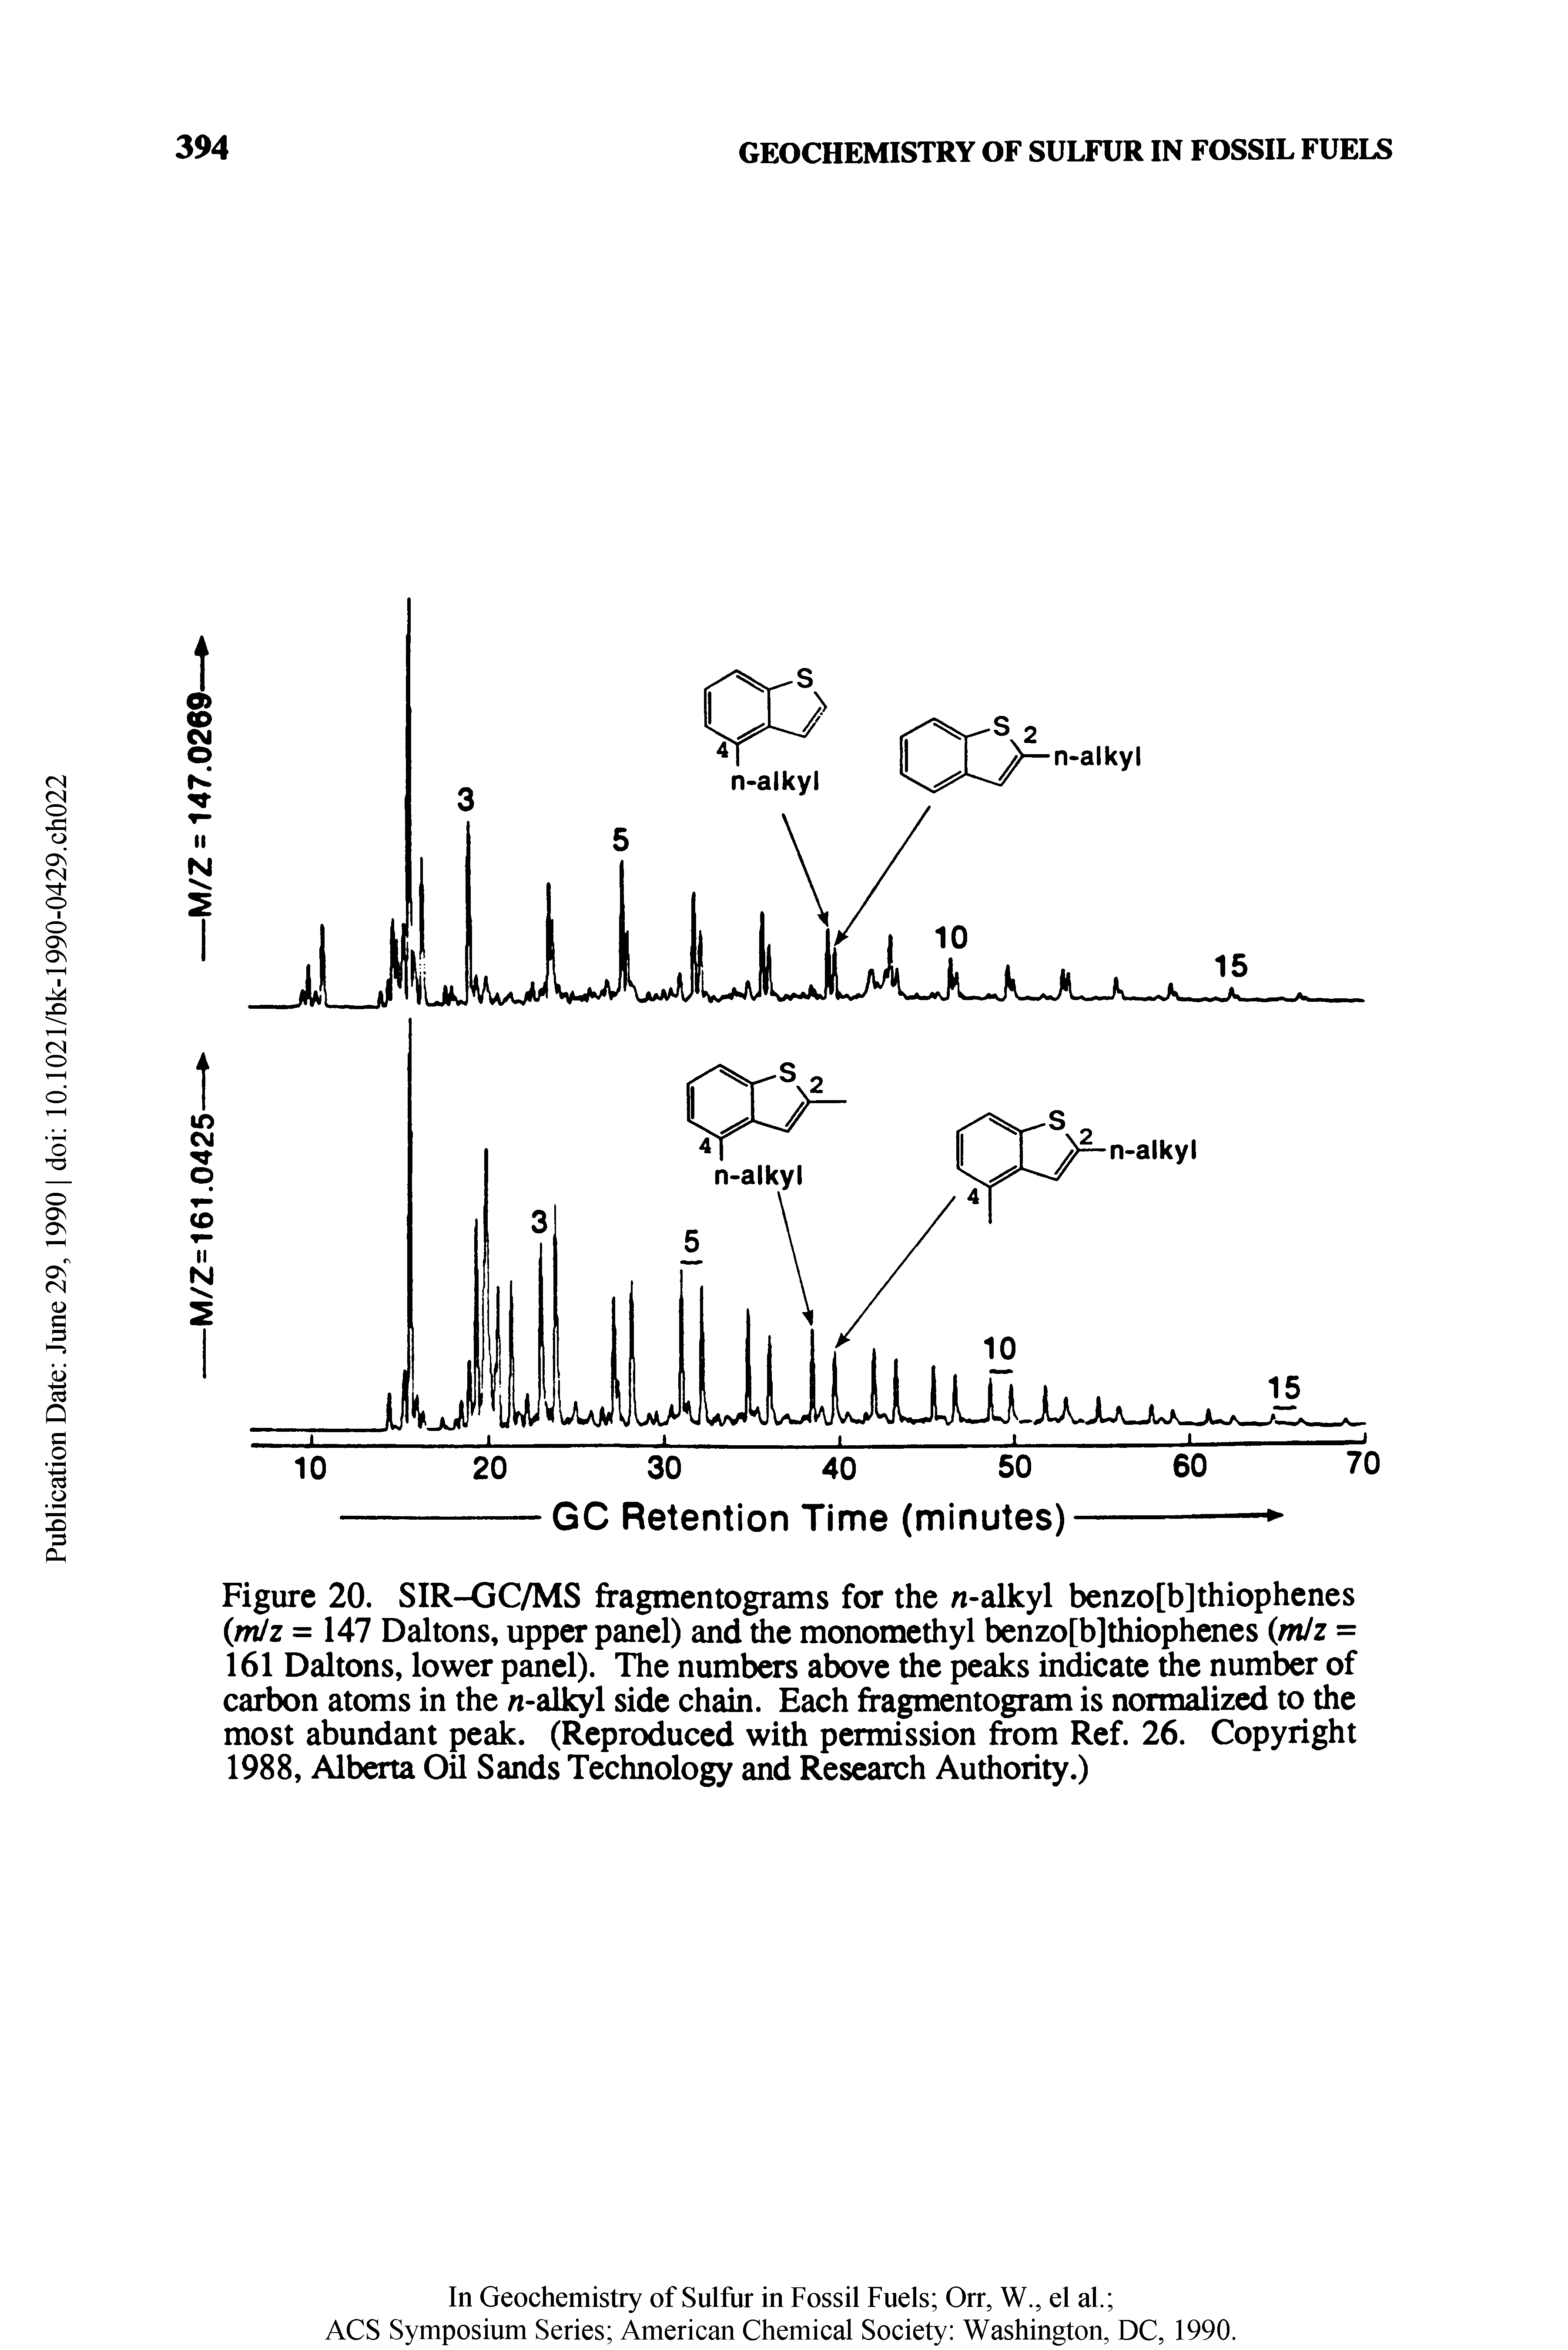 Figure 20. SIR-CJC/MS fragmentograms for the n-alkyl benzo[b]thiophenes (mJz = 147 Daltons, upper panel) and the monomethyl benzo[b]thiophenes (mlz = 161 Daltons, lower panel). The numbers above the peaks indicate the number of carbon atoms in the n-alkyl side chain. Each fragmentogram is normalized to the most abundant peak. (Reproduced with permission from Ref. 26. Copyright 1988, Alberta Oil Sands Technology and Research Authority.)...